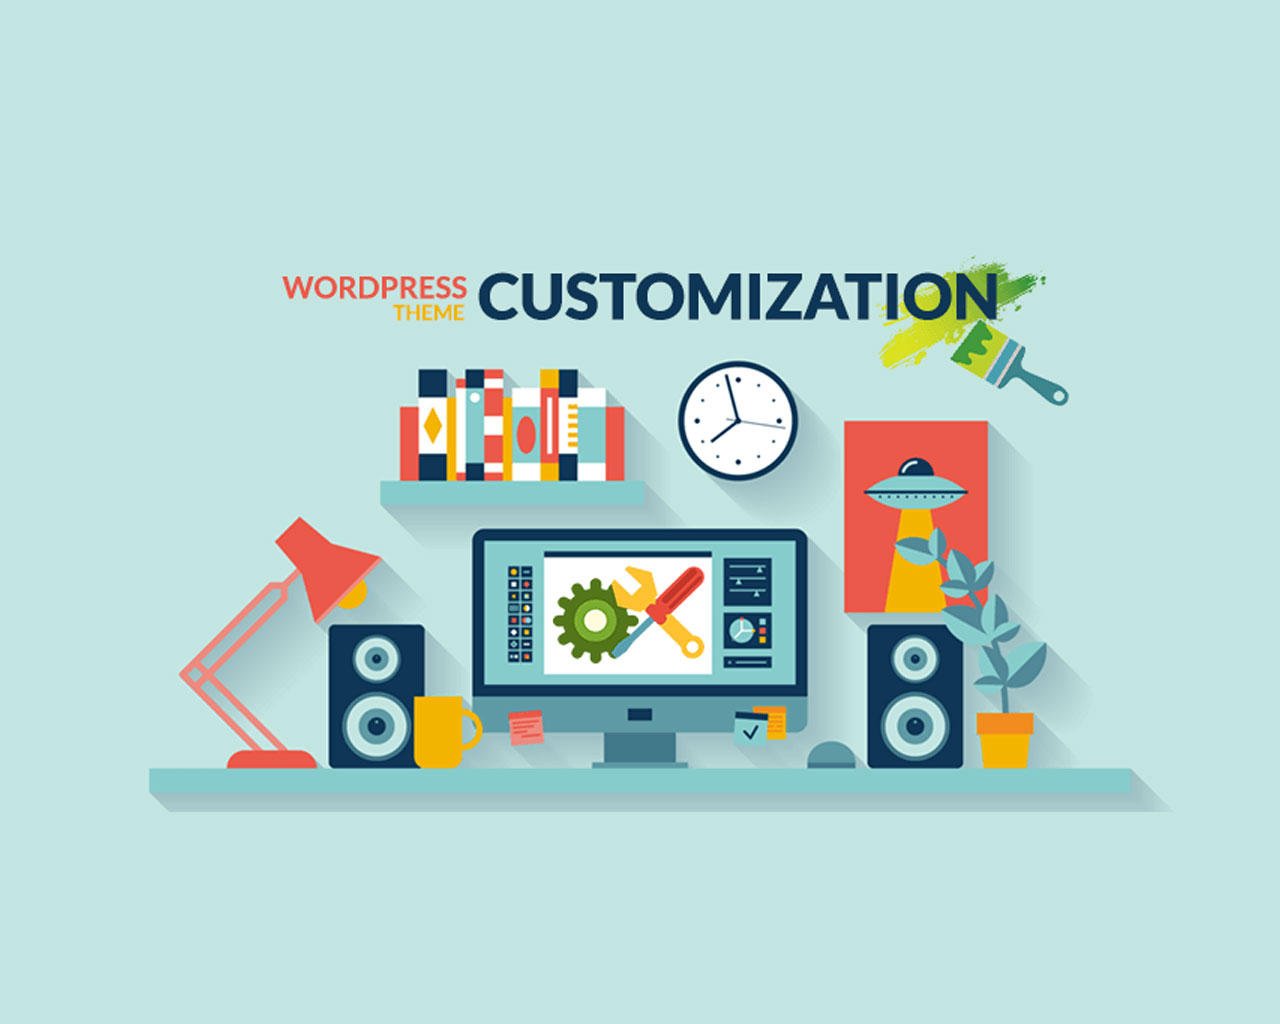 The product configurator is a plugin that is fully compatible with all WordPress themes